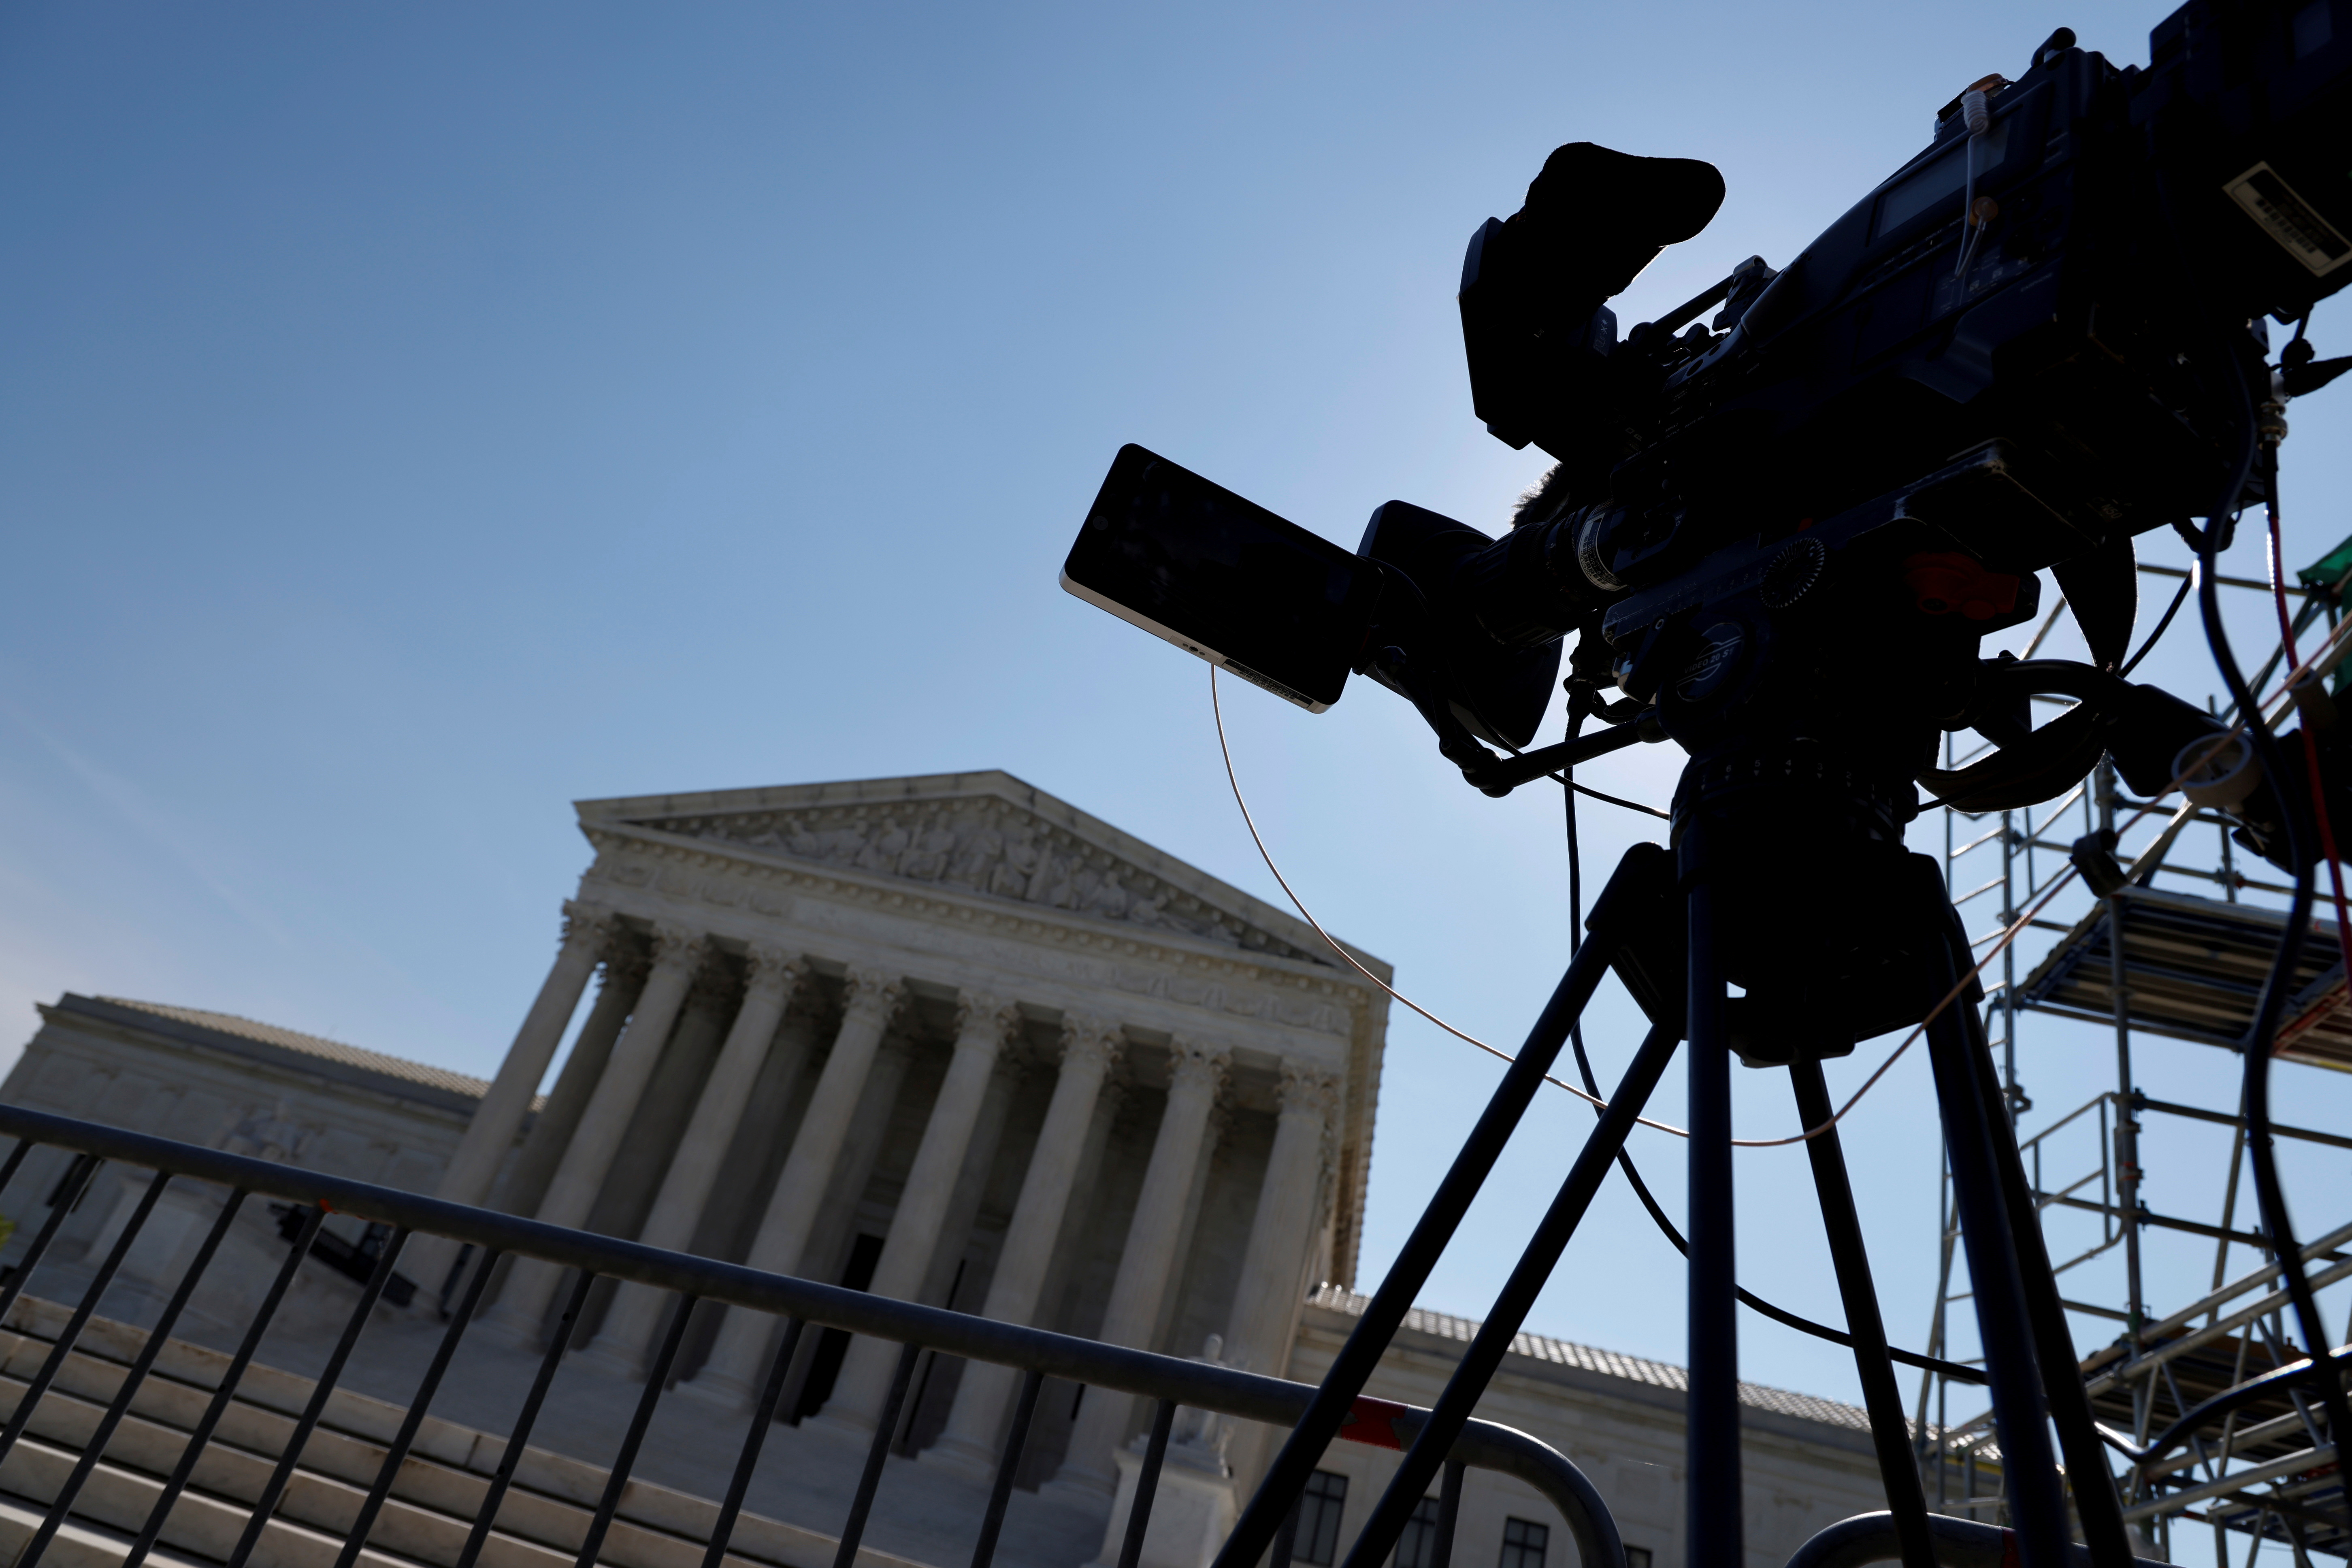 A lone network television camera is trained on the U.S. Supreme Court building in Washington